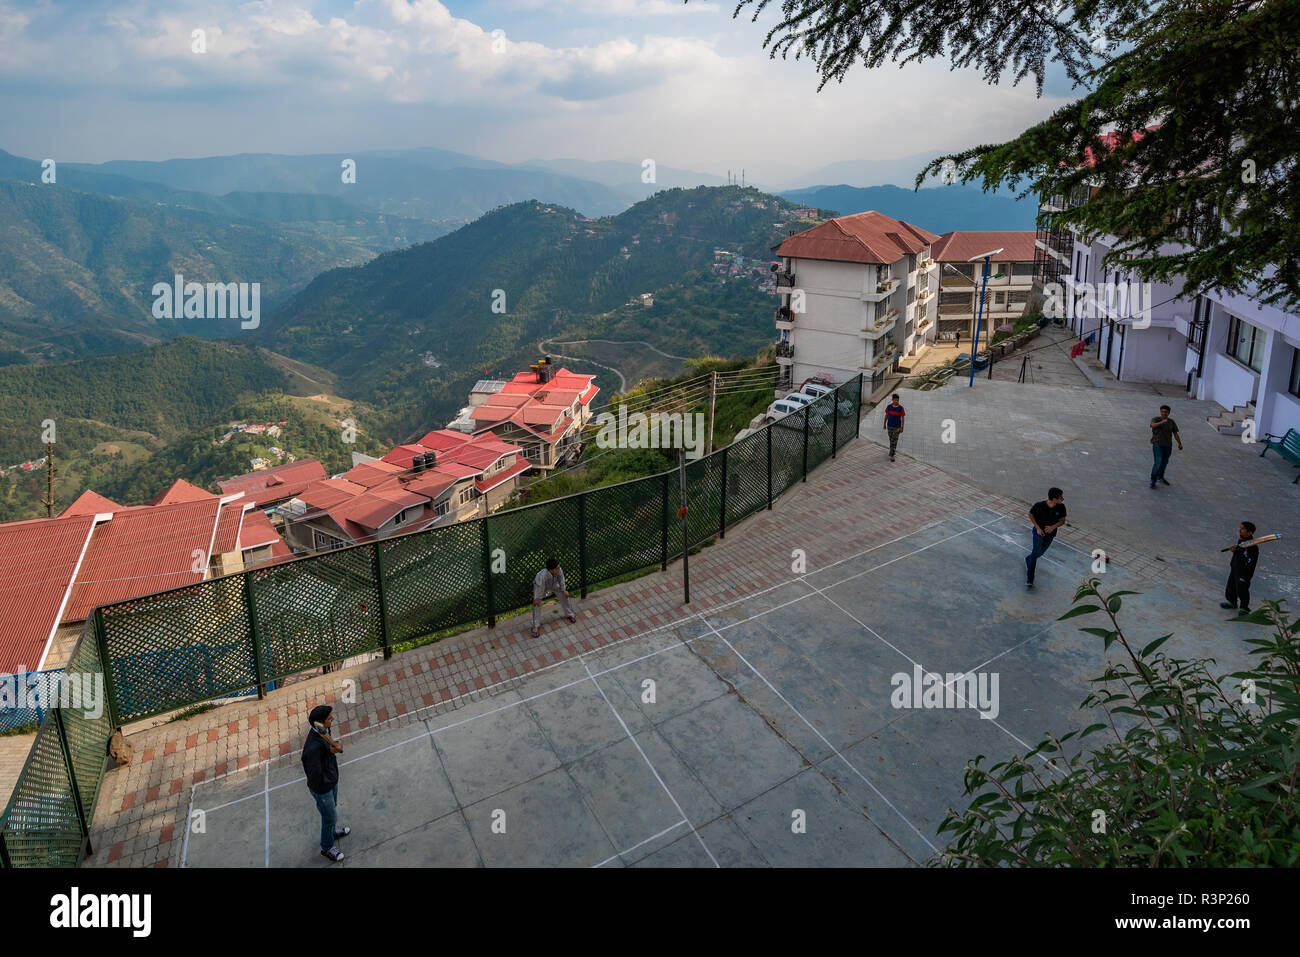 Youngsters playing a game of cricket with the Himalayan foothills in the backdrop in Kasumpti, Shimla, Himachal Pradesh, India Stock Photo